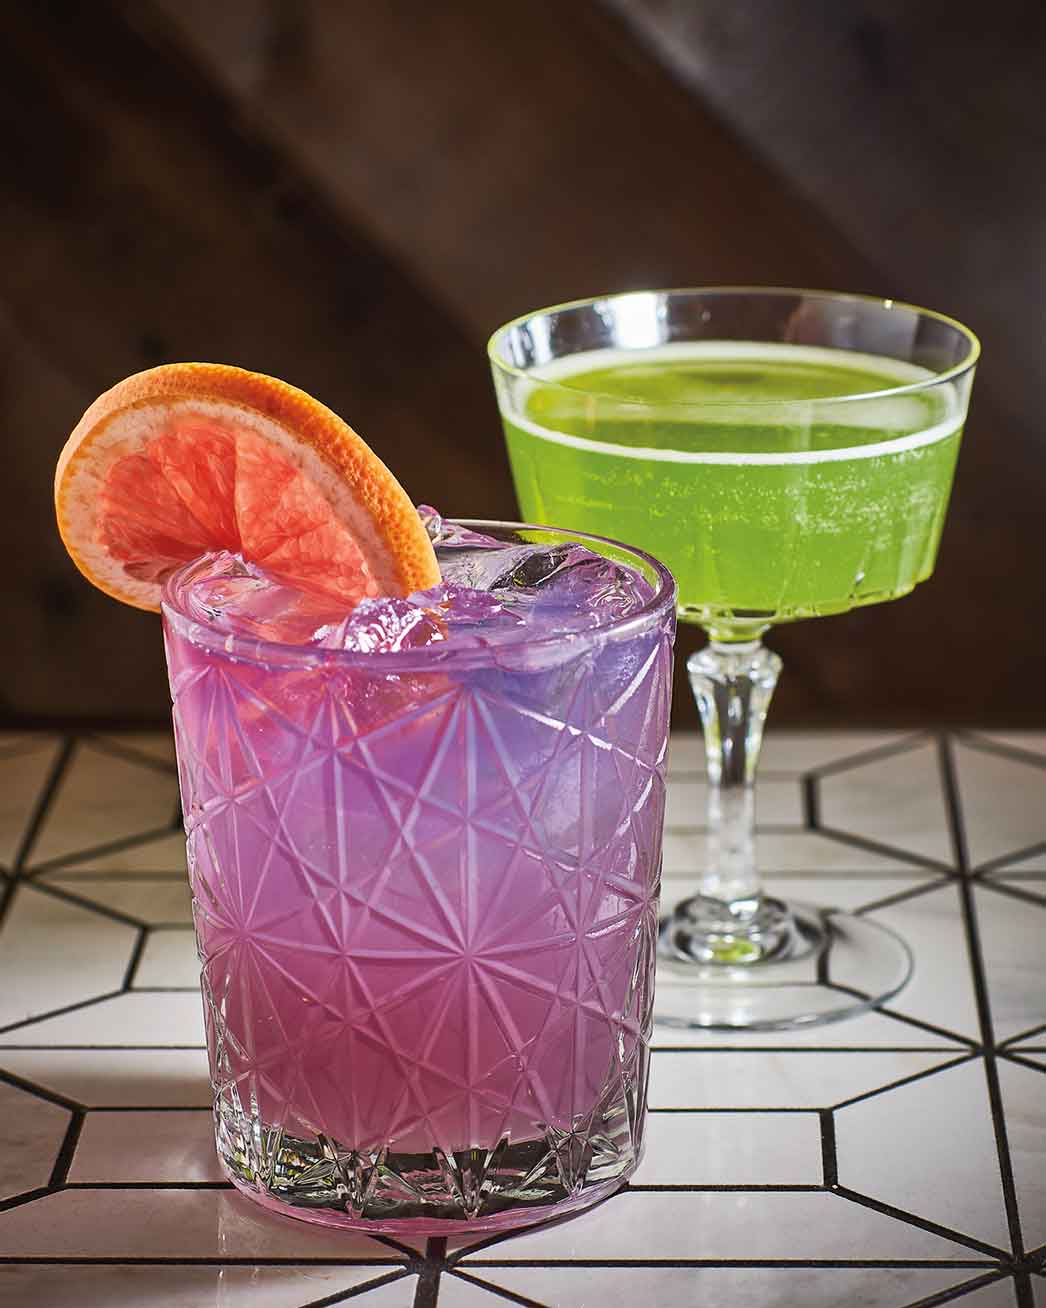 Mountain cocktails from Where the Buffalo Roam include the High Violet purple tumbler and Misty Mountain Hop. Photo by Damian Lamartine